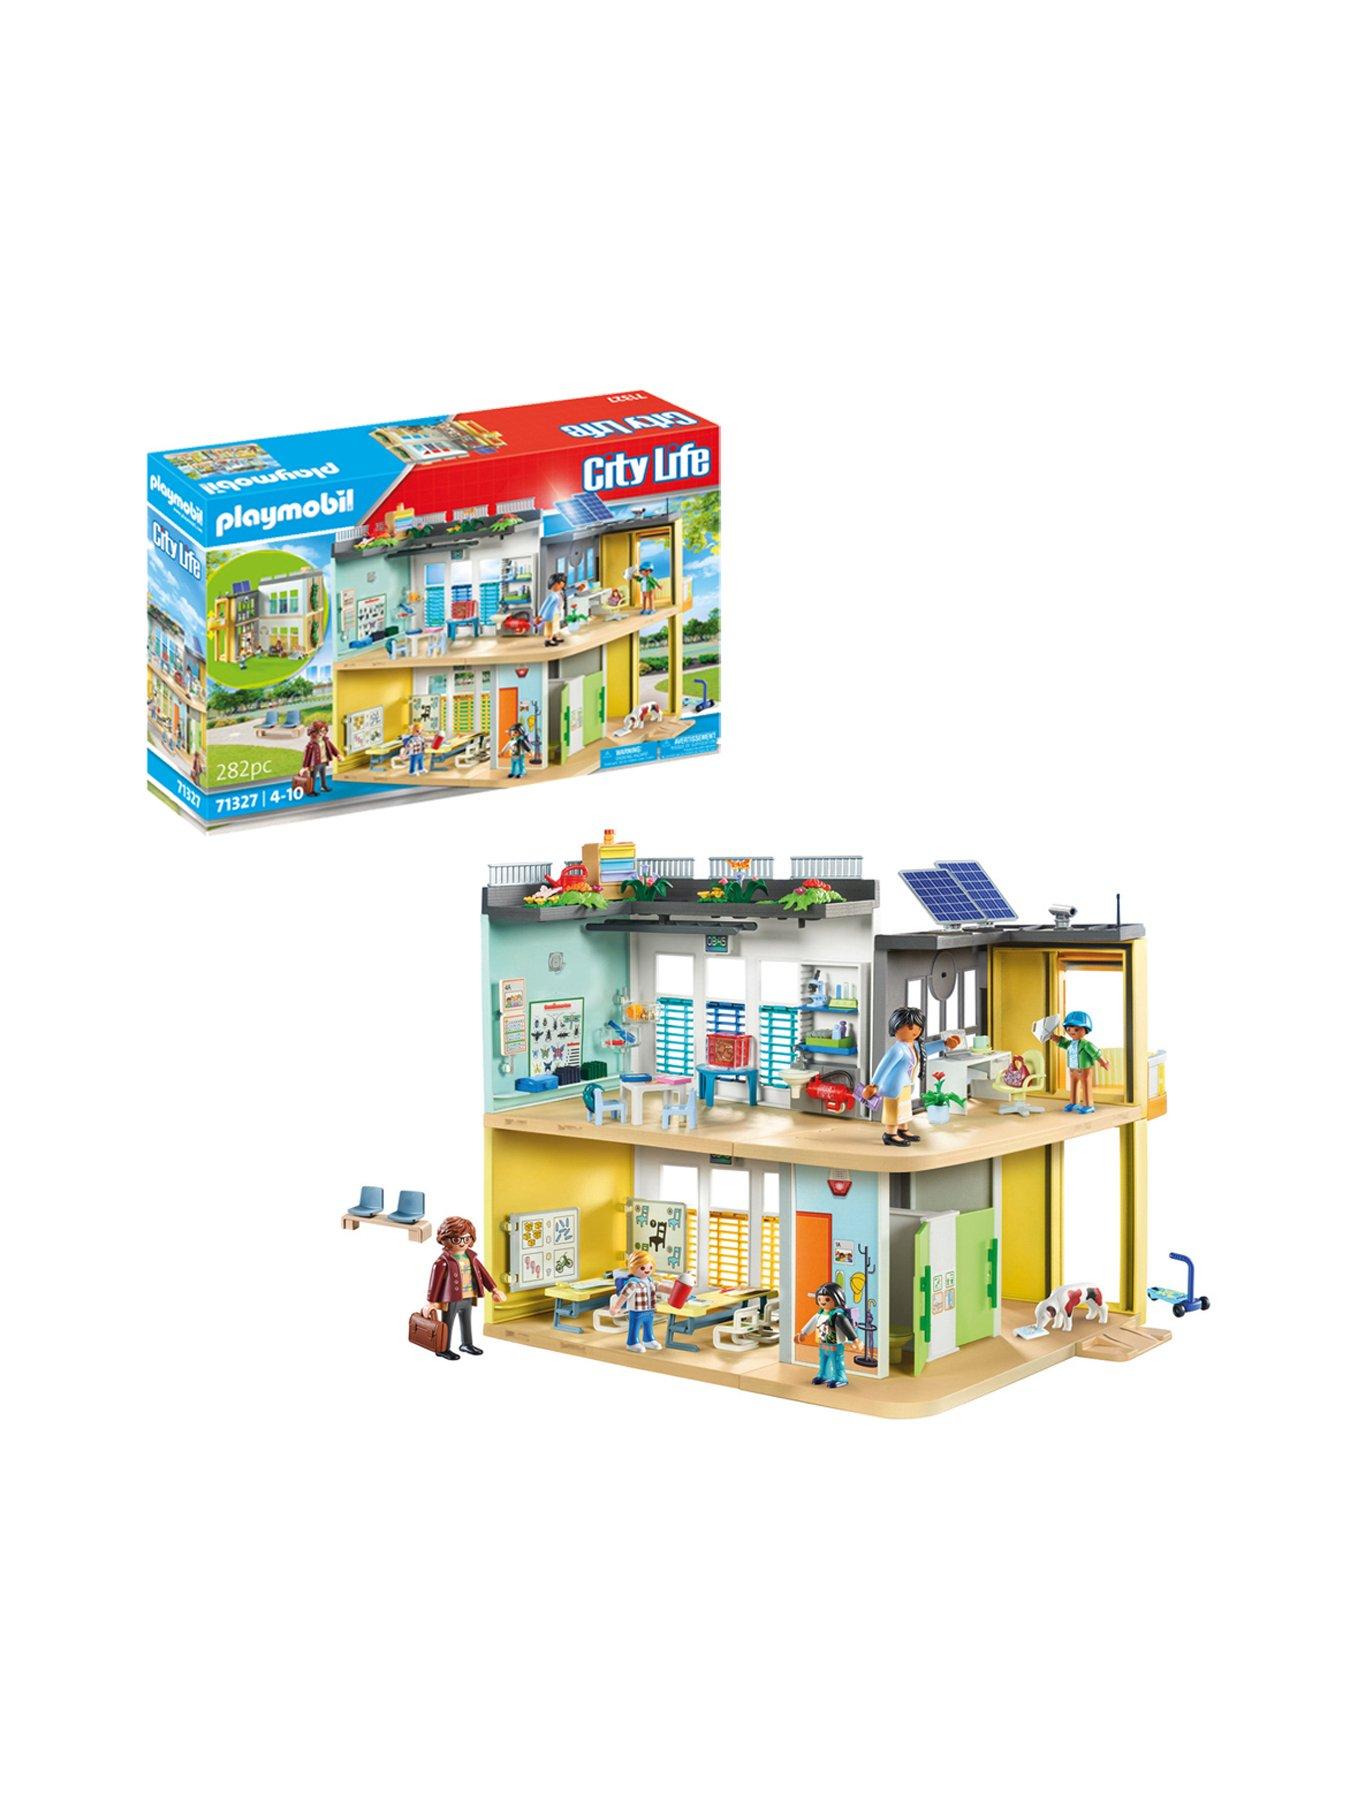 Massive Playmobil City Life Collection! Children's Hospital and 11